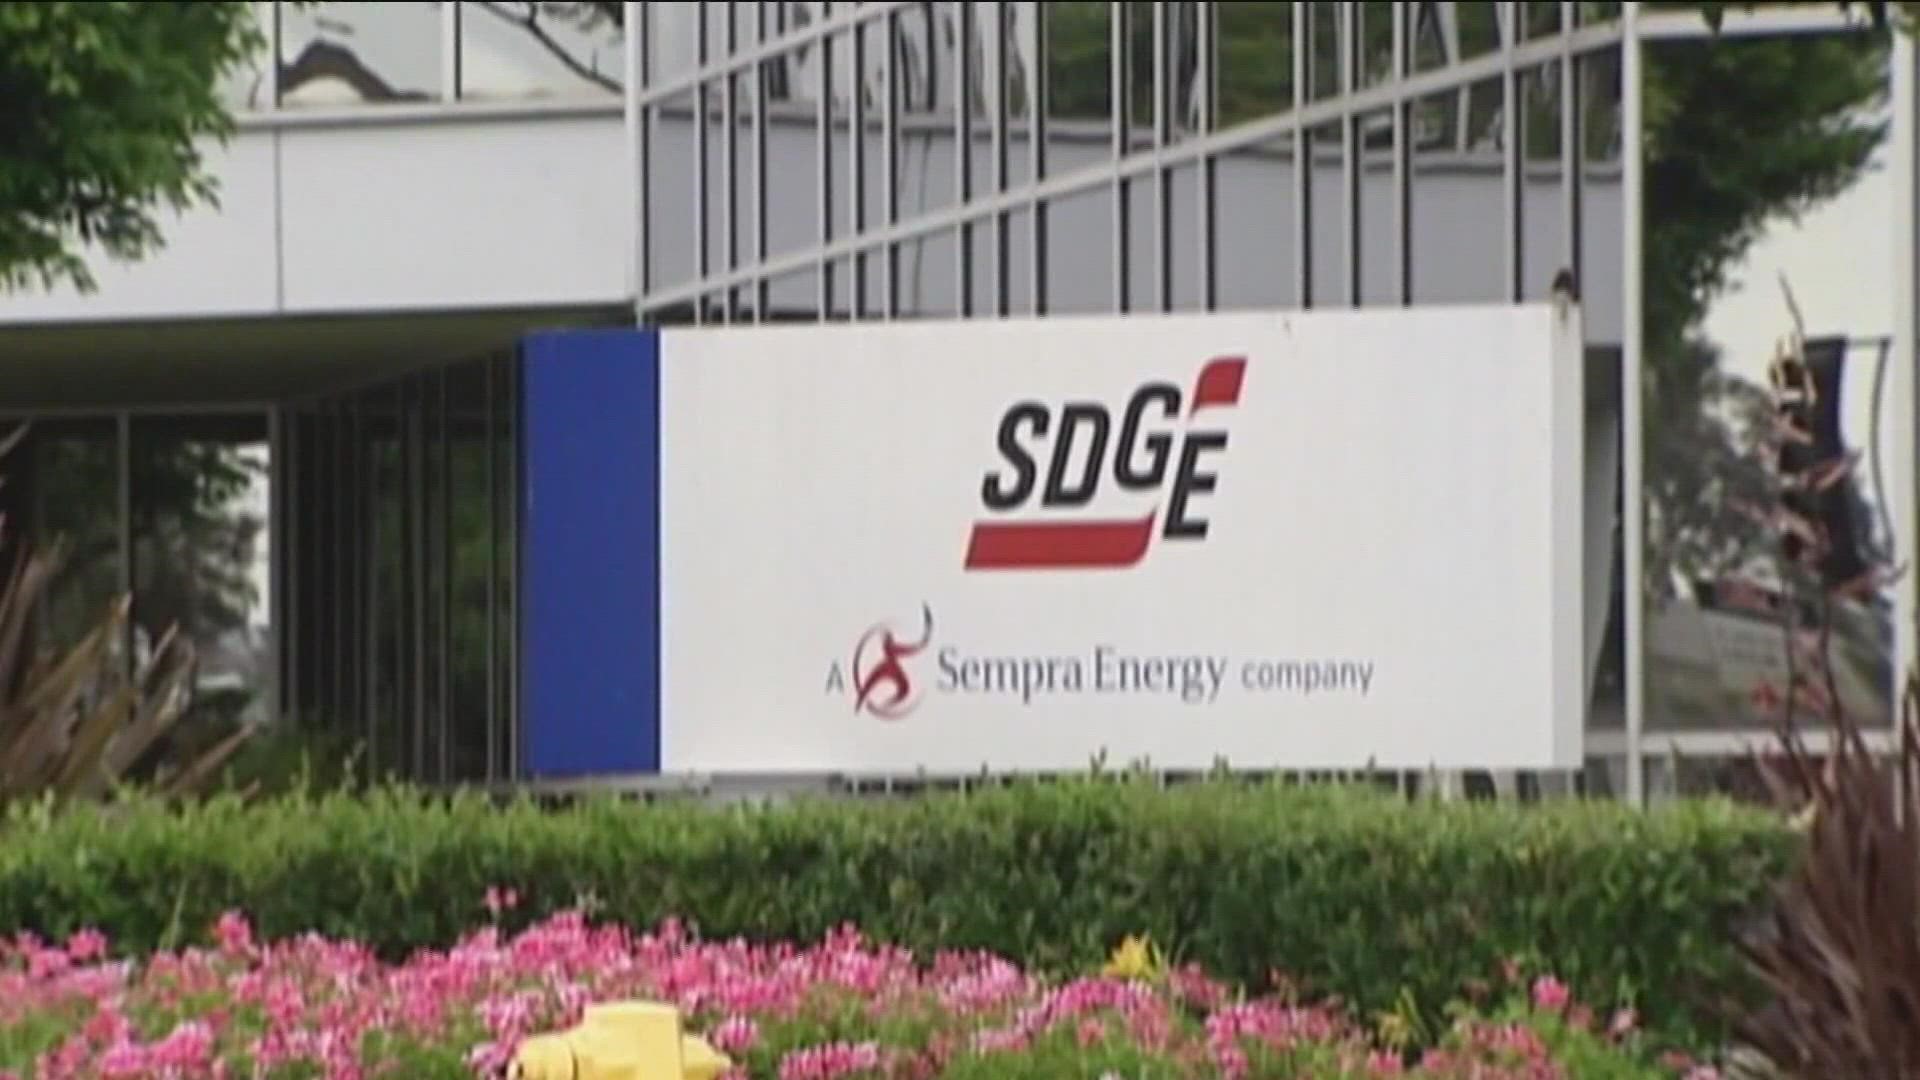 At least two more rate hikes are expected, one by SDG&E in January and a 3% statewide hike in 2023.